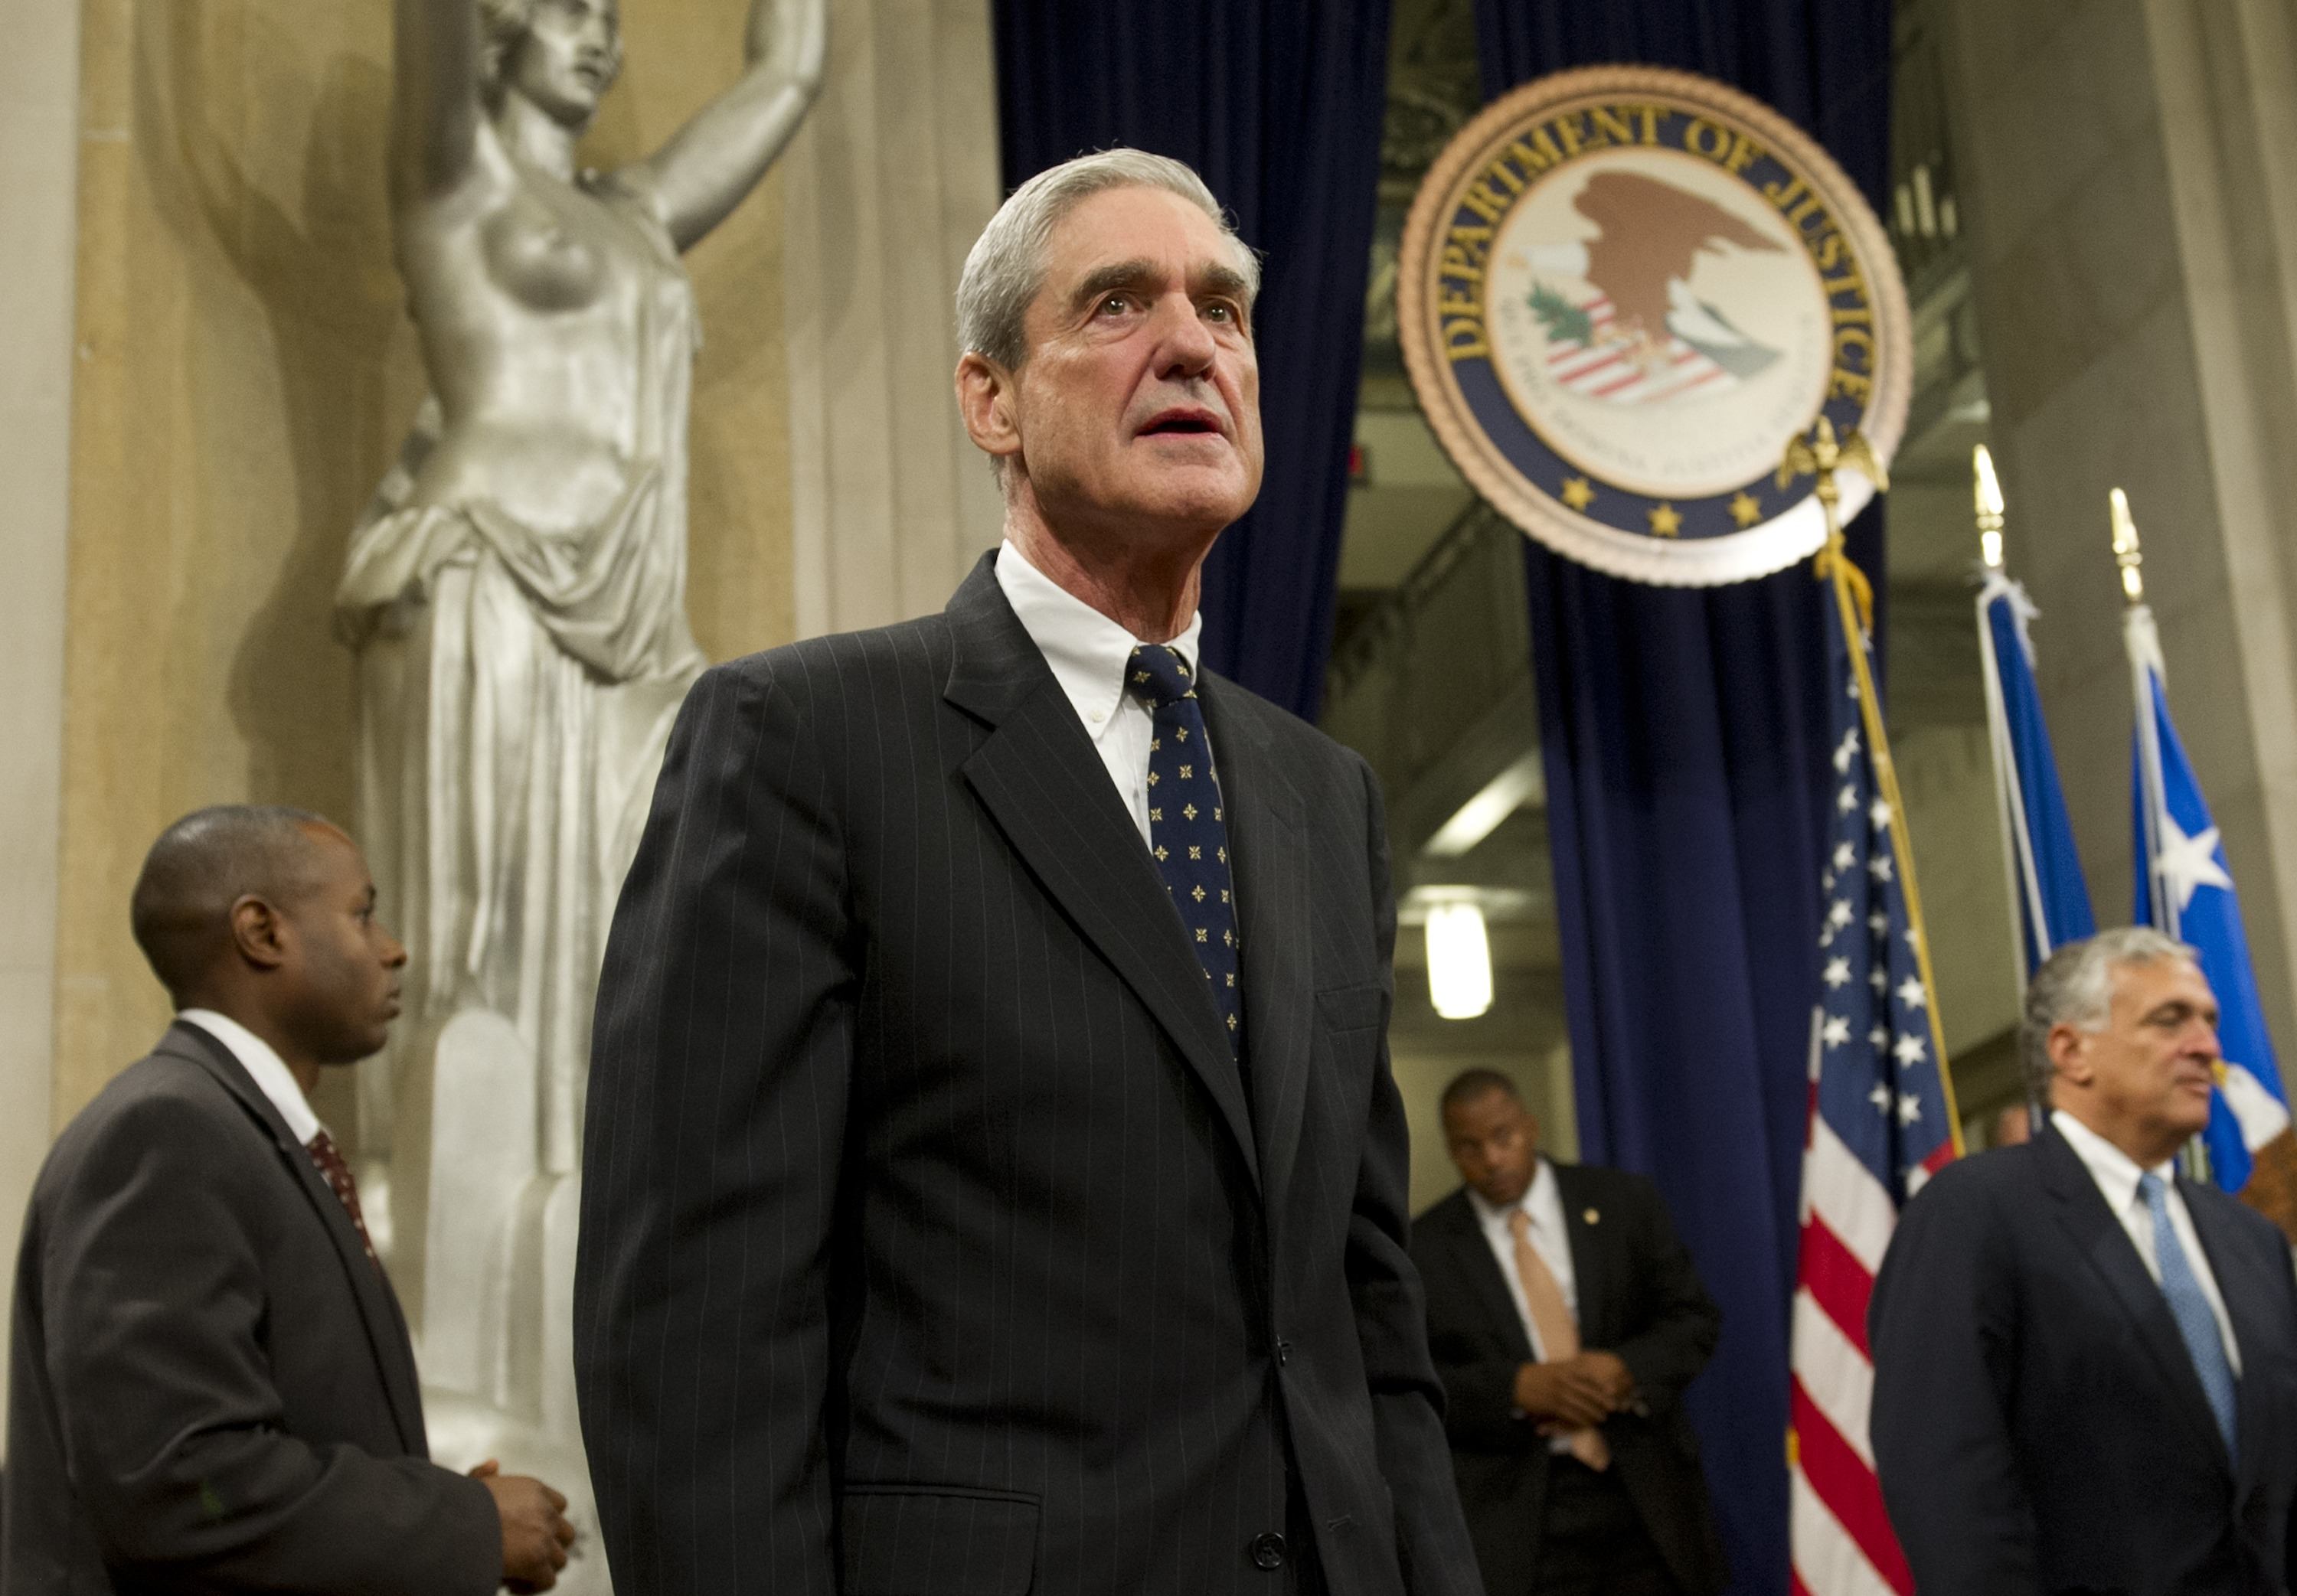 Robert Mueller standing in front of a statue of lady justice and the seal of the Department of Justice.